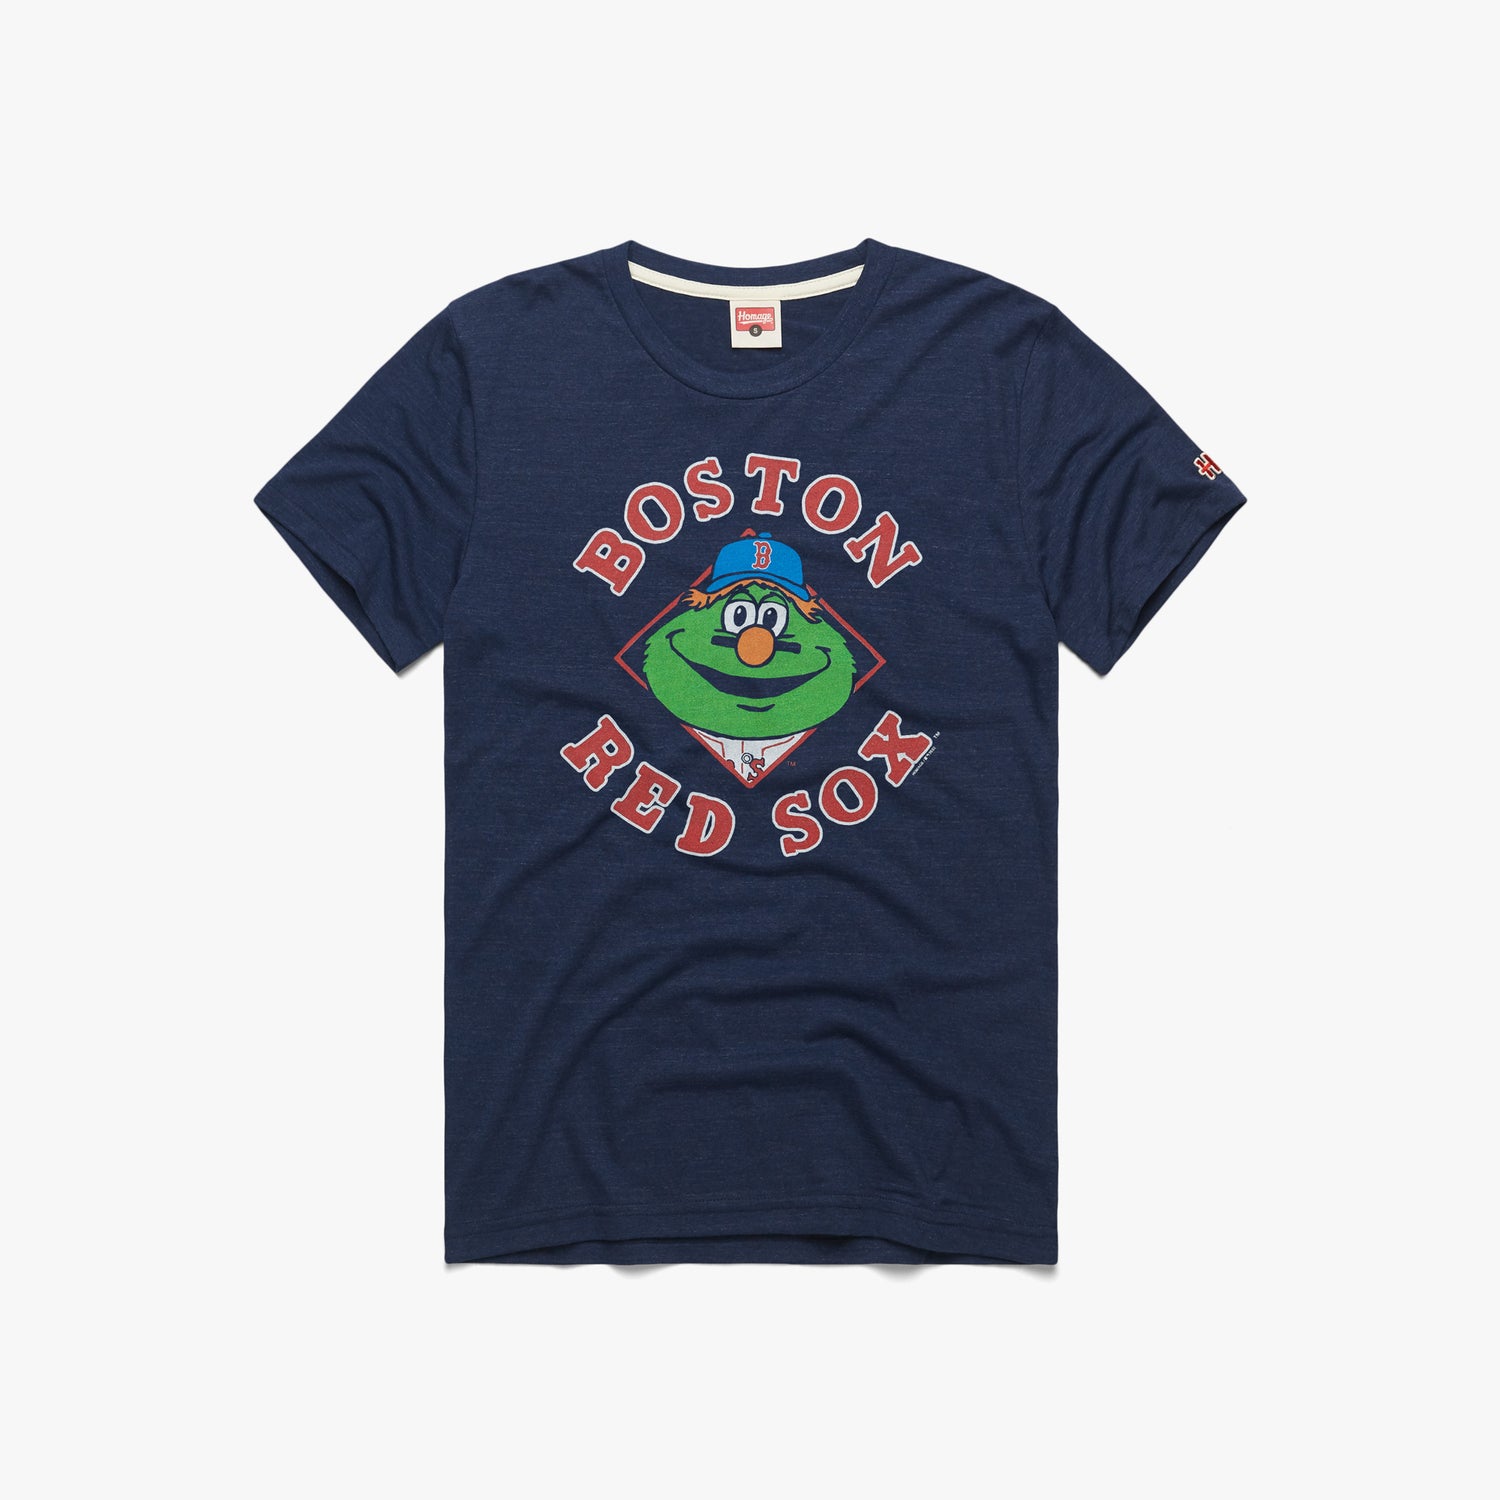 Boston Red Sox Wally The Green Monster